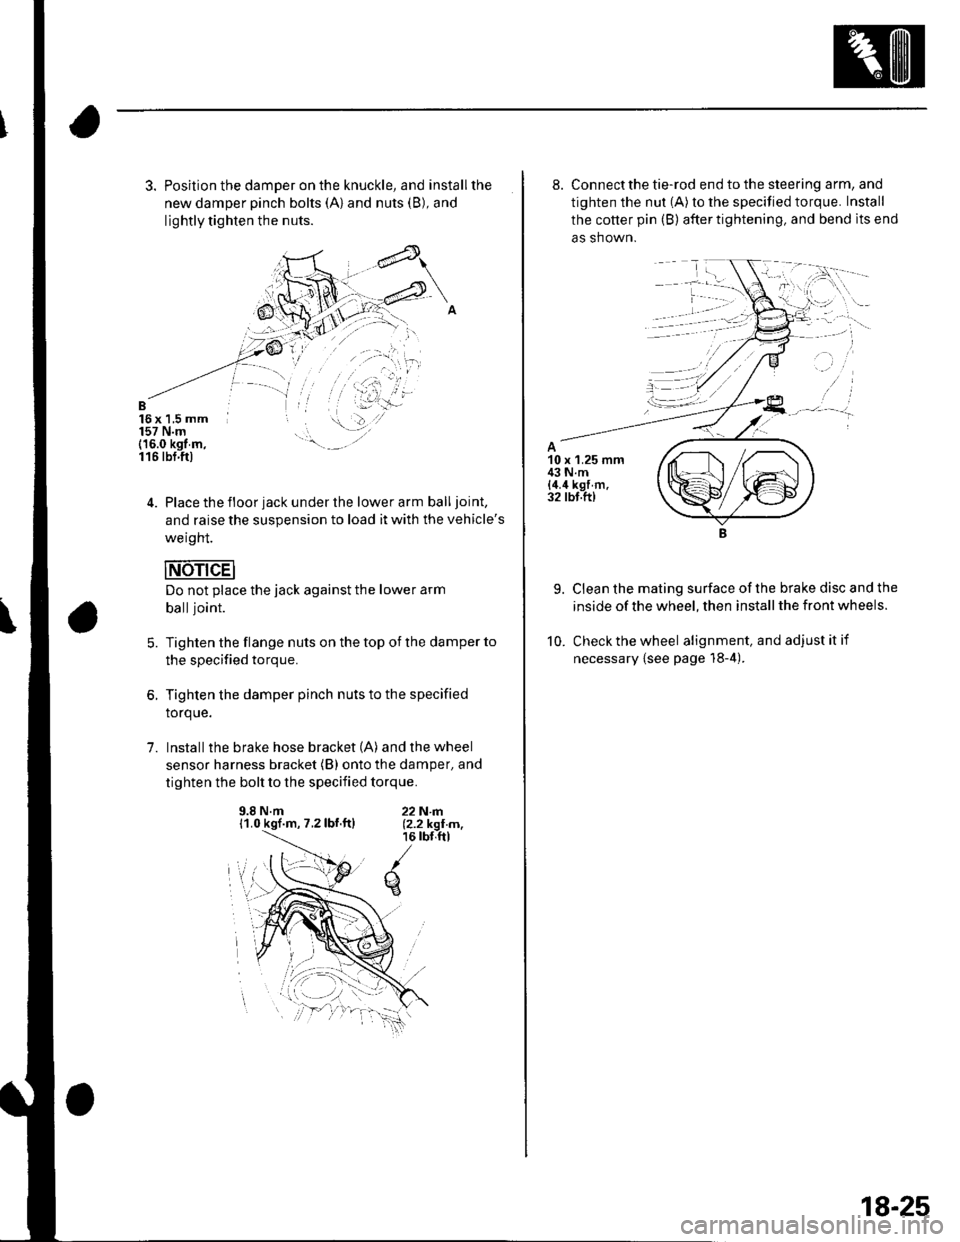 HONDA CIVIC 2003 7.G Workshop Manual 3. Position the damper on the knuckle, and installthe
new damper pinch bolts (A) and nuts (B), and
lightly tighten the nuts.
B16x 1,5 mm157 N.m(16.0 kgt m,116 tbt.ftl
4. Place the floor jack under the